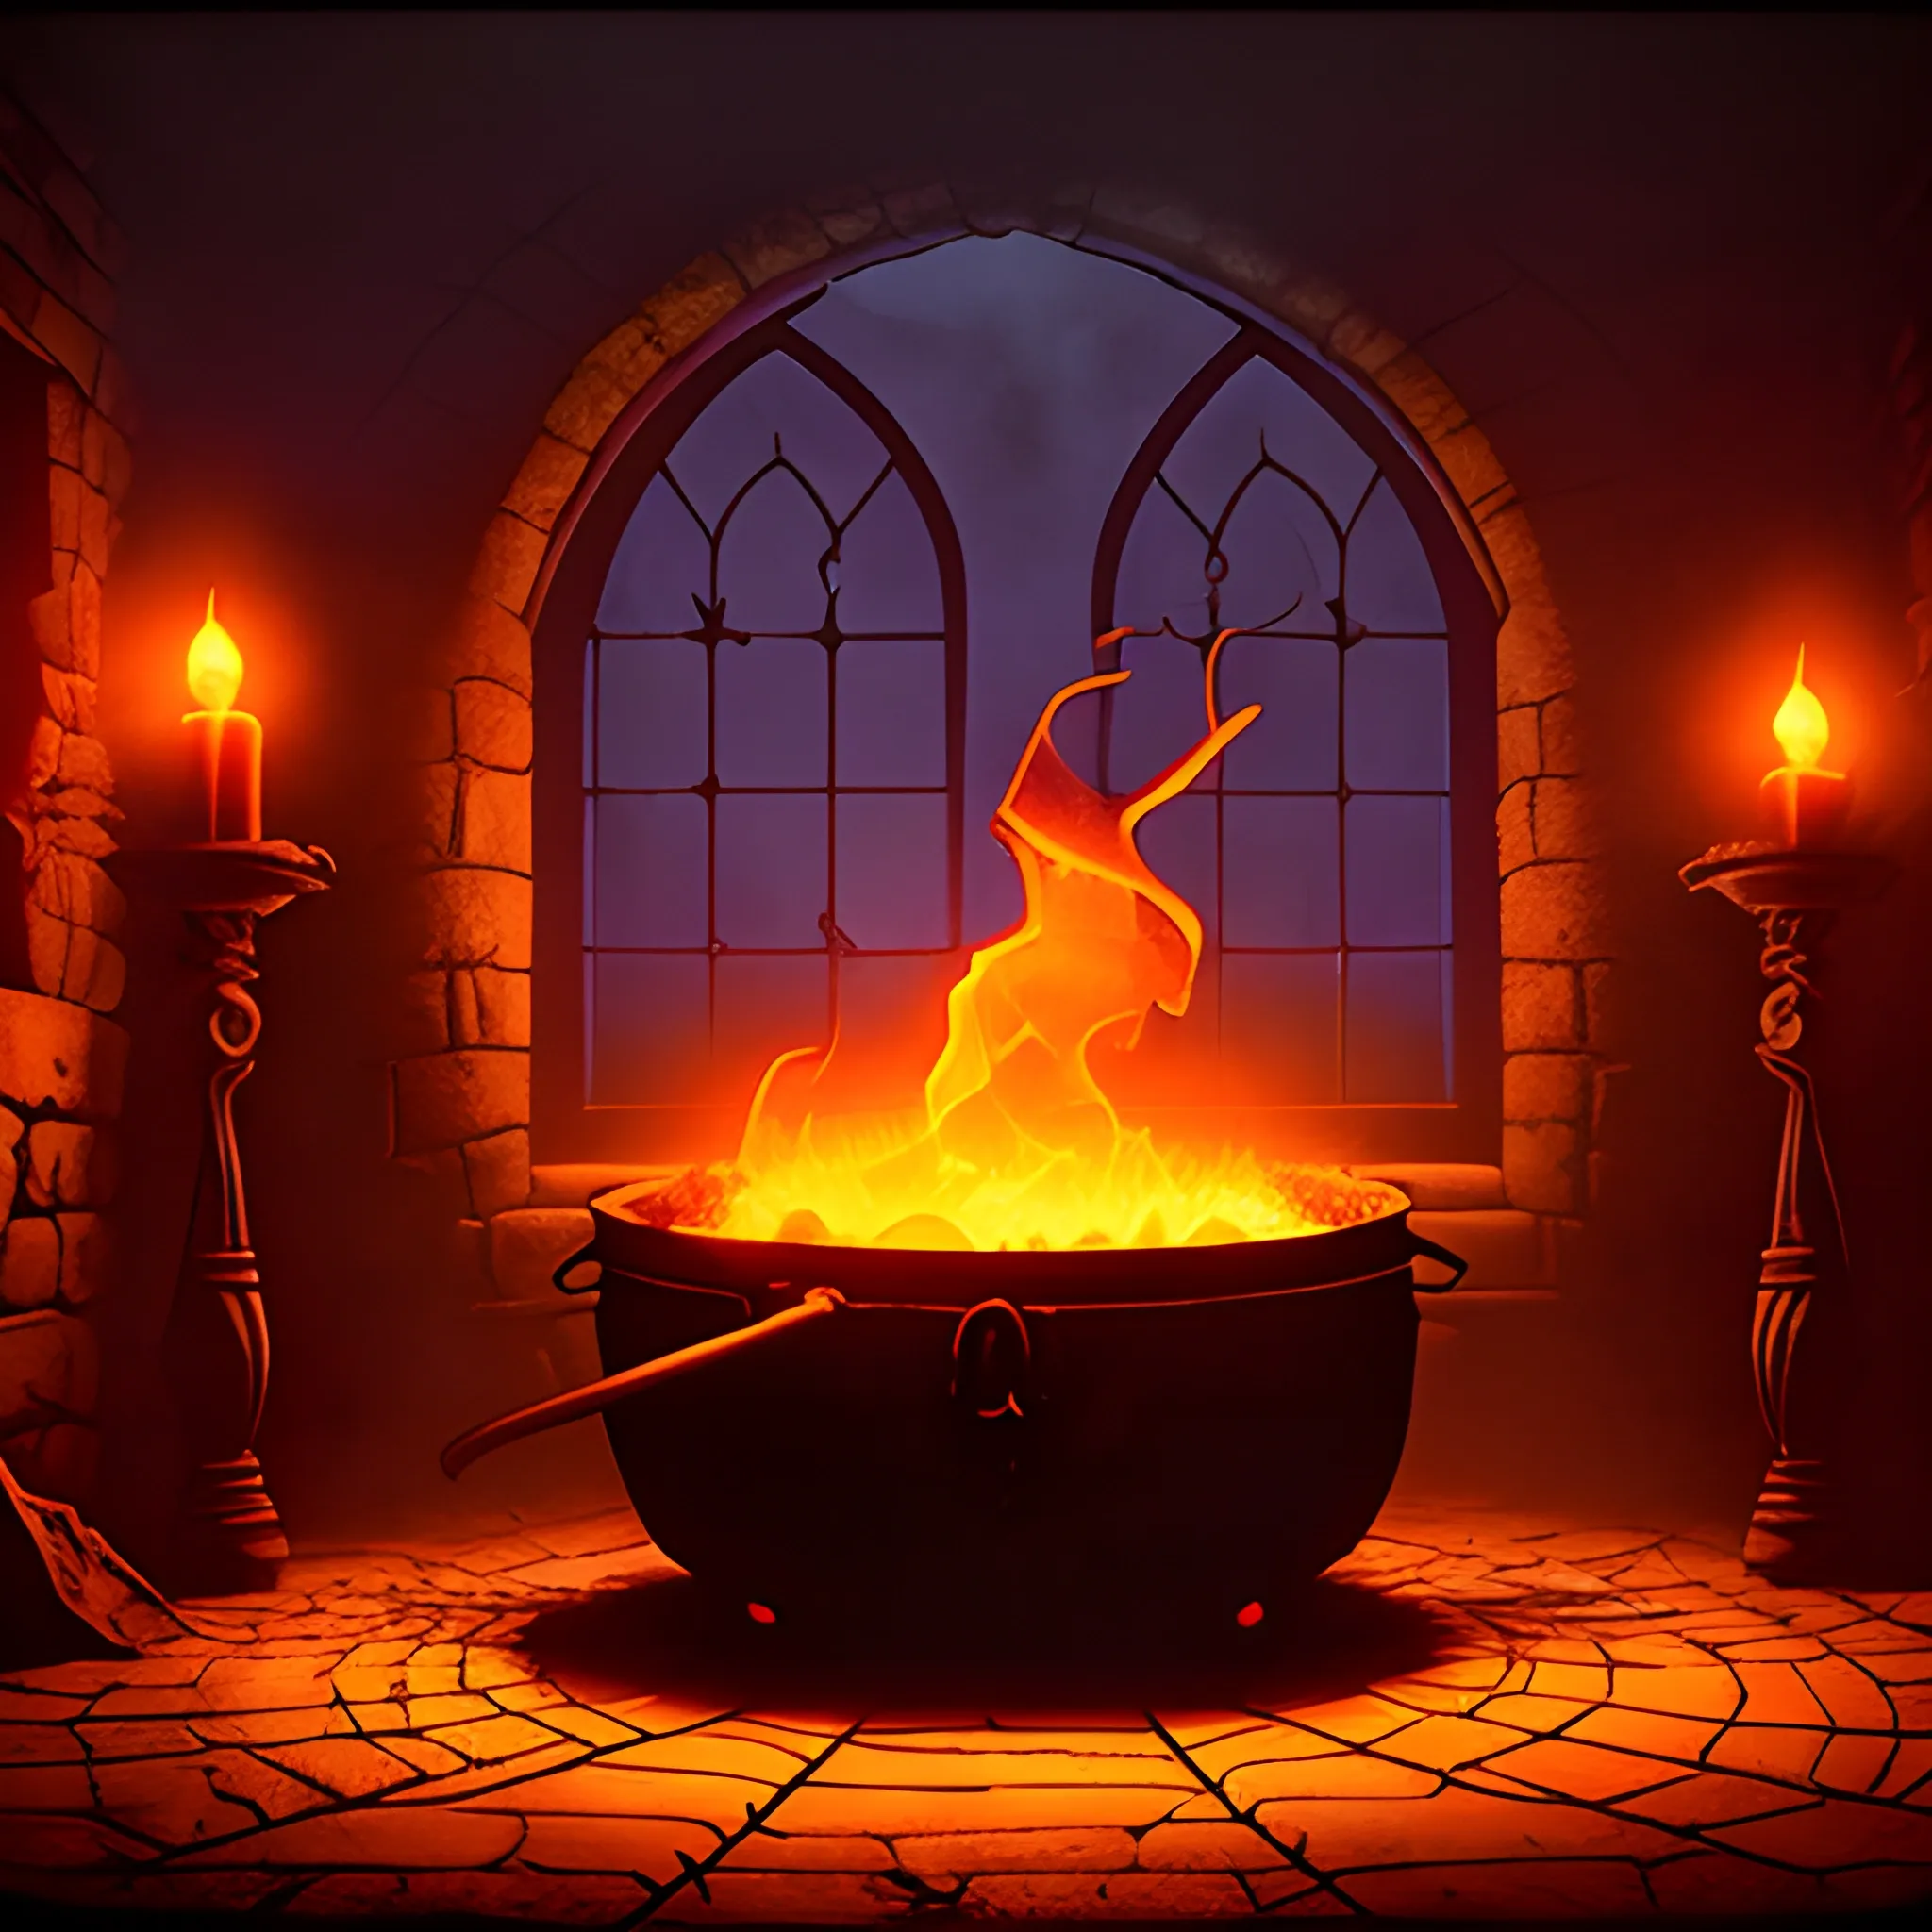 A group of witches gather at a smoky creepy-looking room around a boiling caldron. A dimmed red-orange colored light glows in the caldron. Walls made of cobbled stone. Spider web creeping around the corner of the room. A raven is standing on the window.